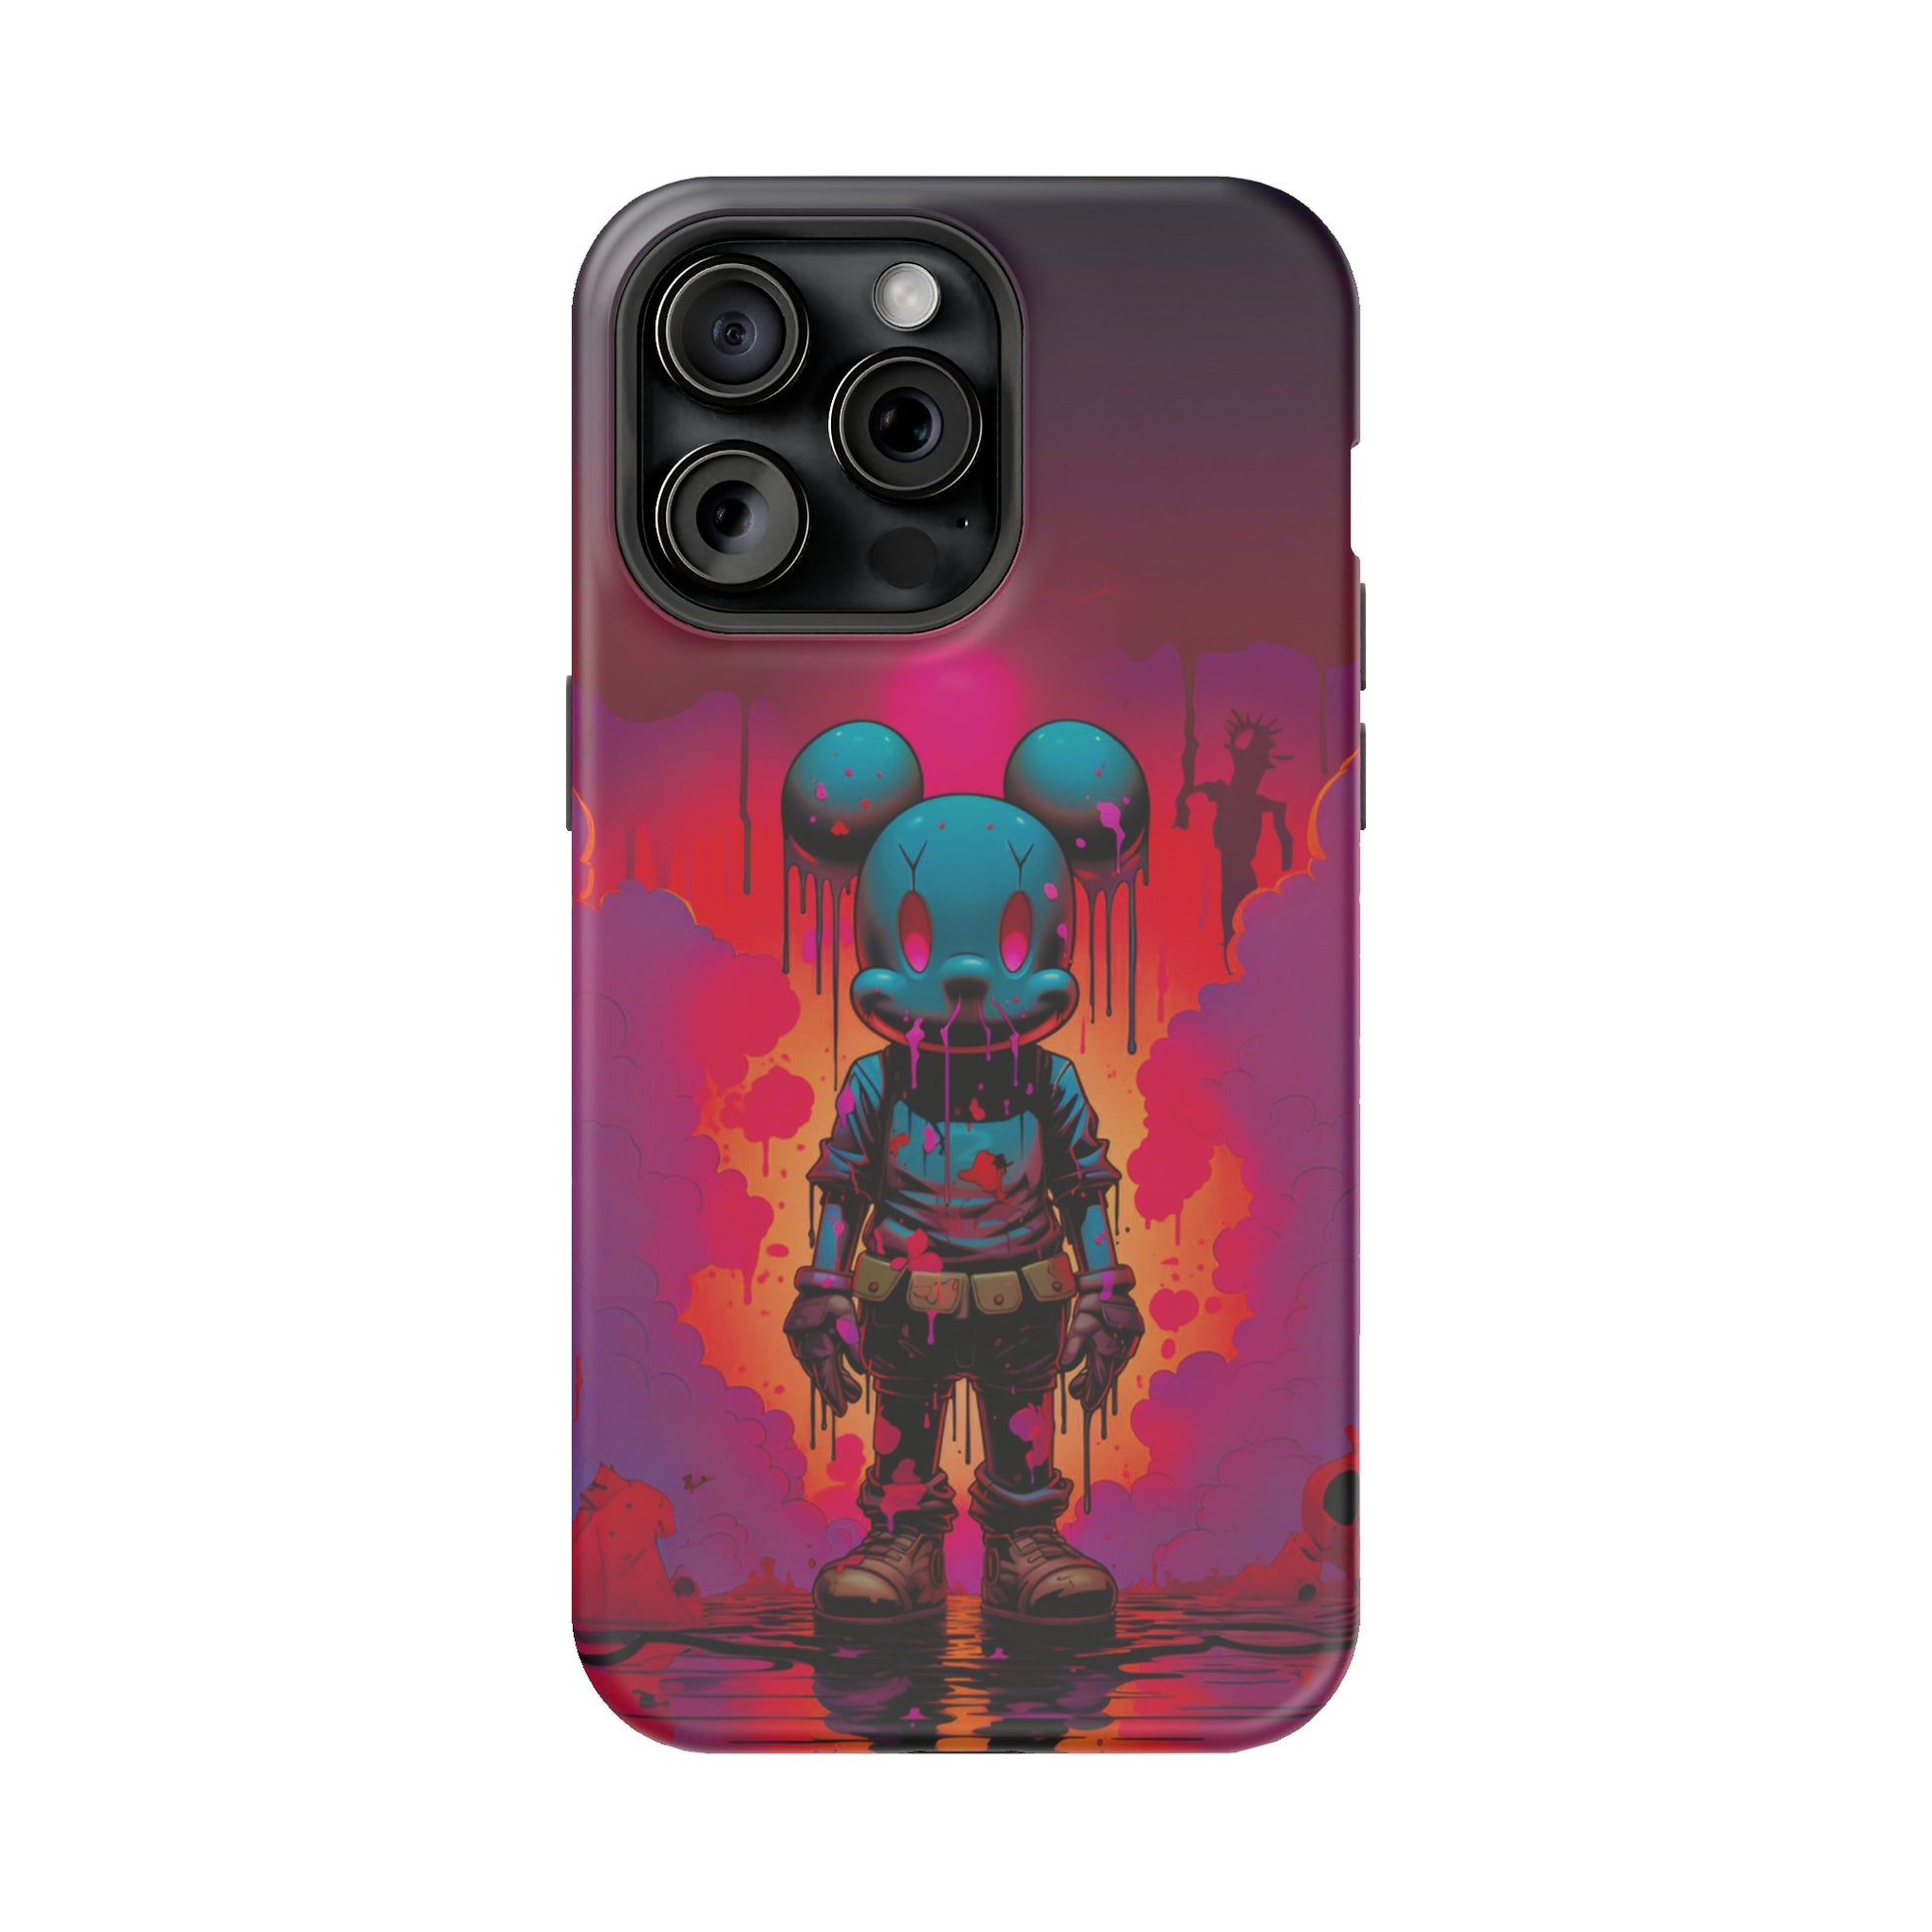 Sunset Whiskers Mousey (iPhone MagSafe Case)Sunset Whiskers Mousey MagSafe Durable Case: Style Meets Protection 📱✨
Upgrade your device with Rima Gallery's Sunset Whiskers Mousey MagSafe Durable Case. This casRimaGallery